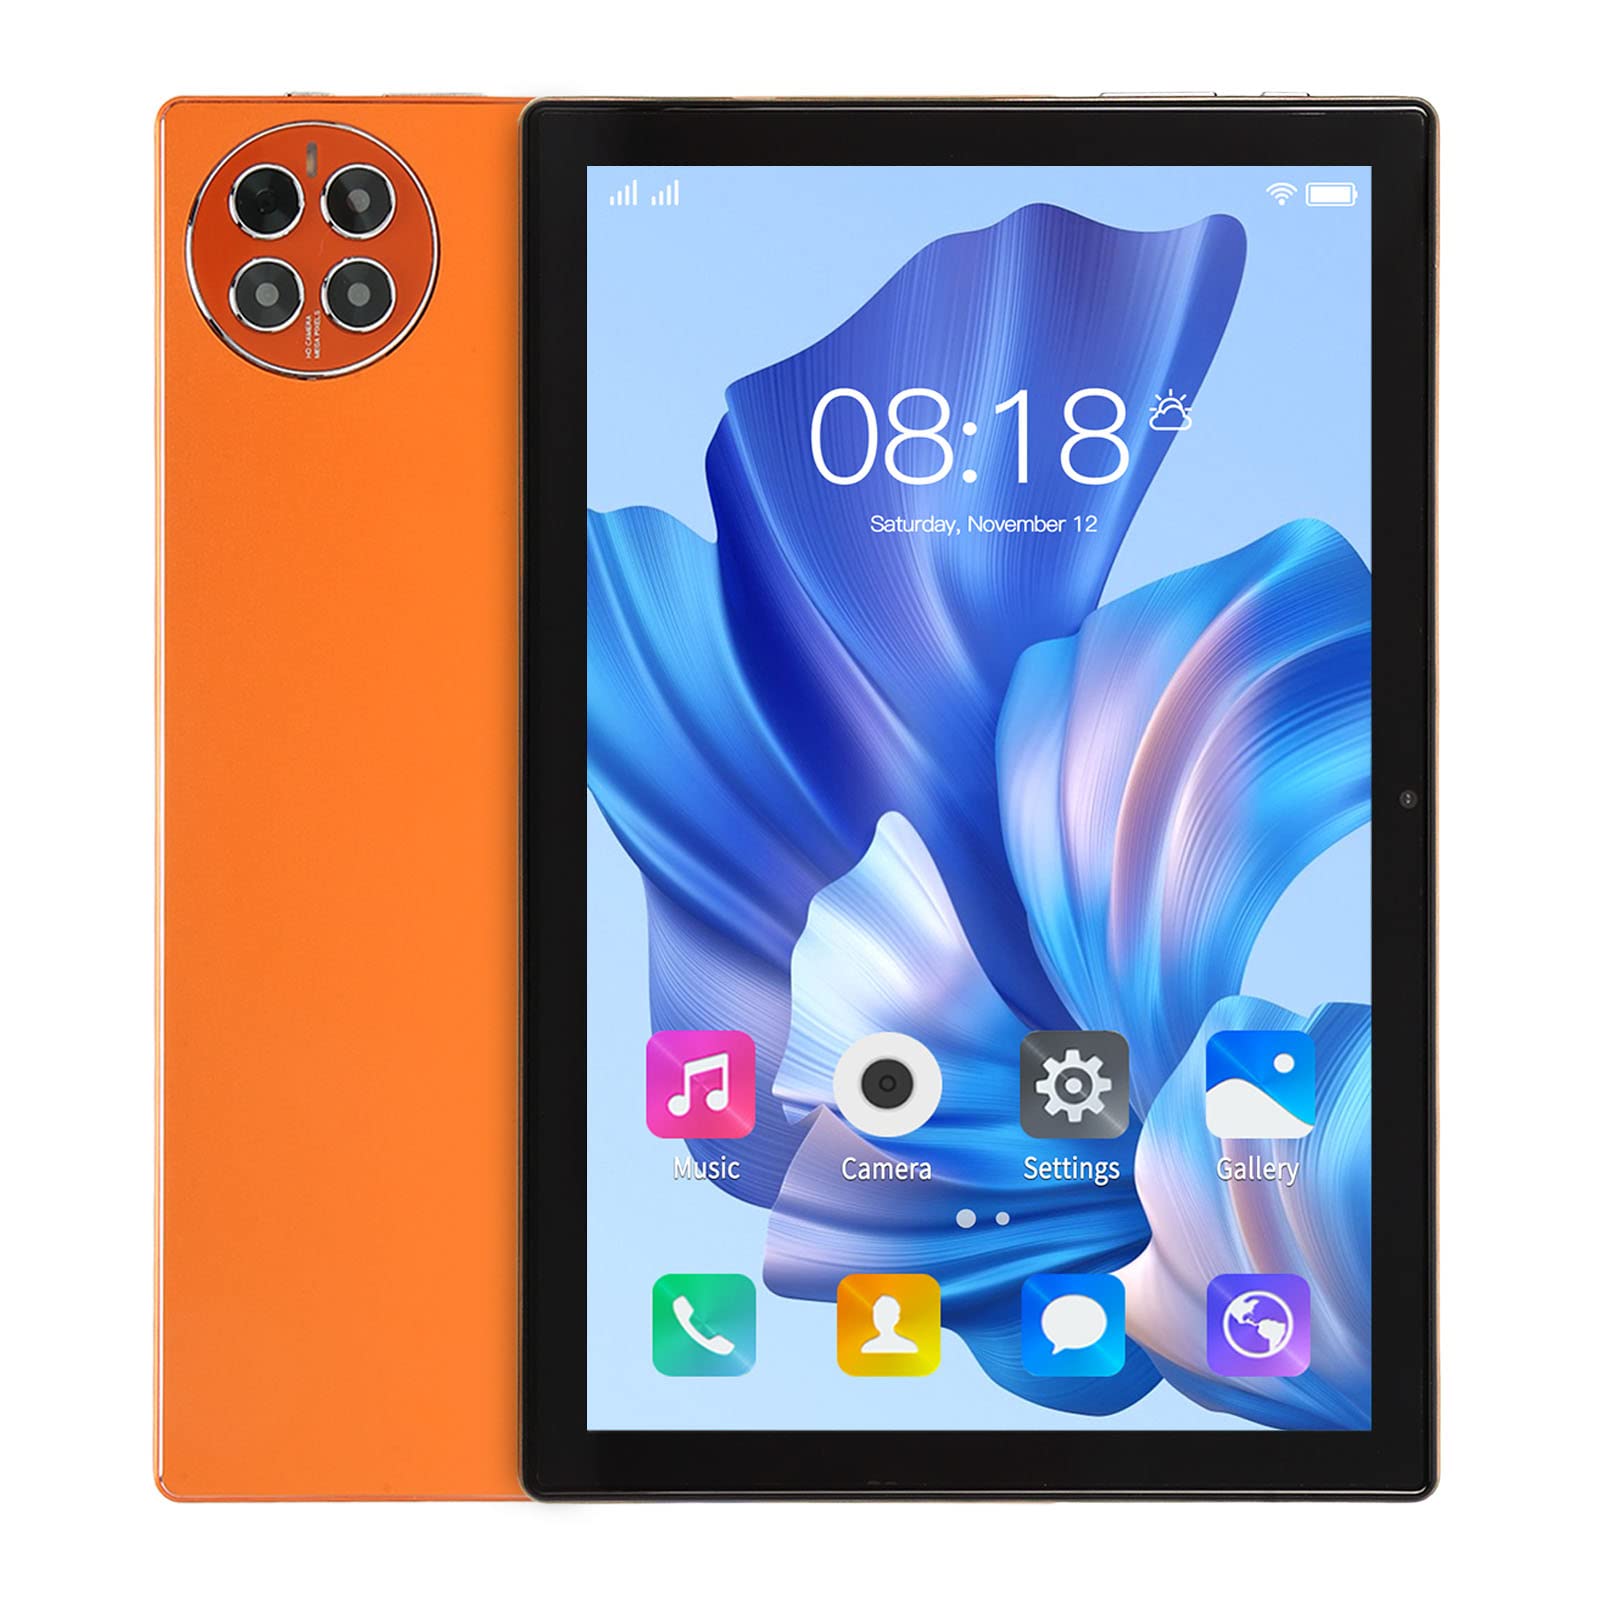 10in Smart Tablet, Octa Core Processor, 1920x1200 IPS Screen, 12GB RAM 256GB ROM, Dual Cameras and Speakers, Long Battery Life (Orange)